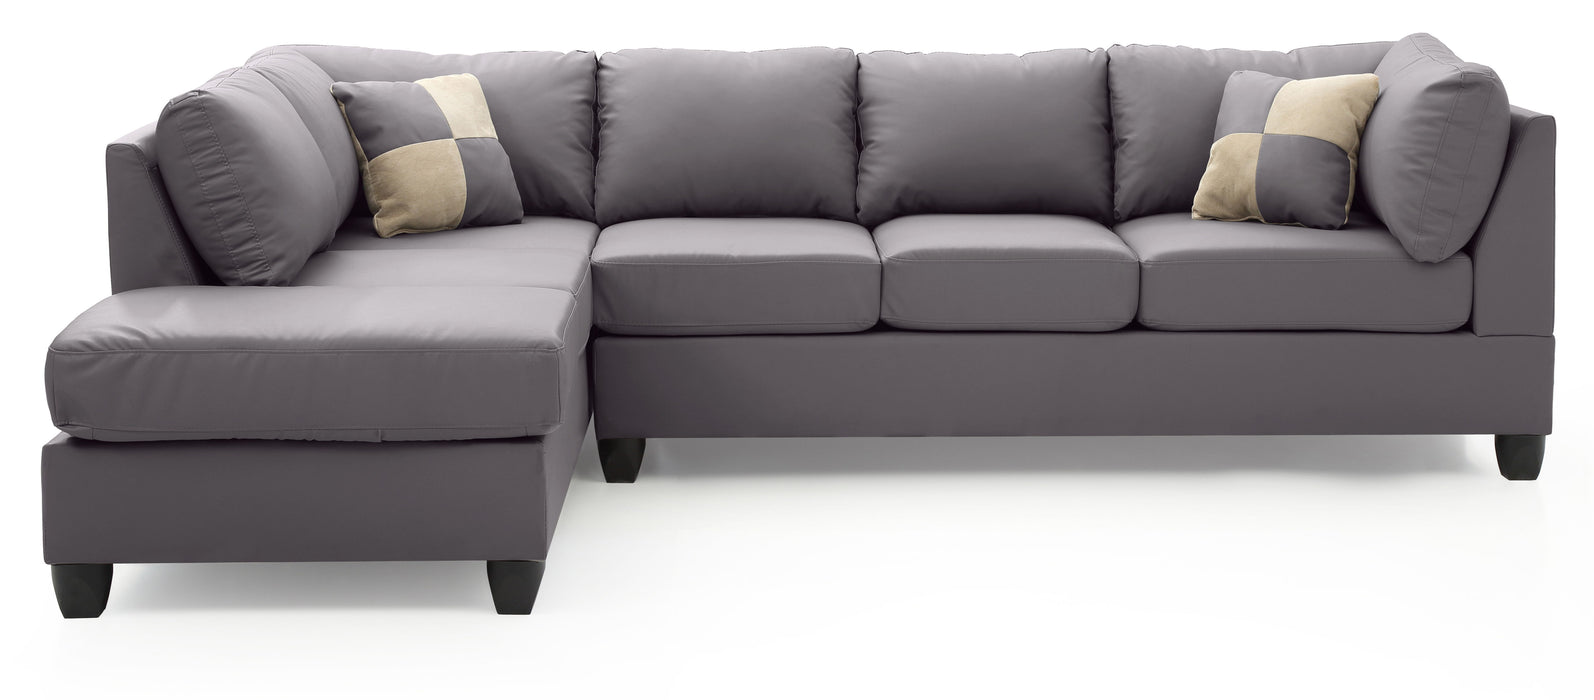 Malone - G642B-SC Sectional (3 Boxes) - Gray